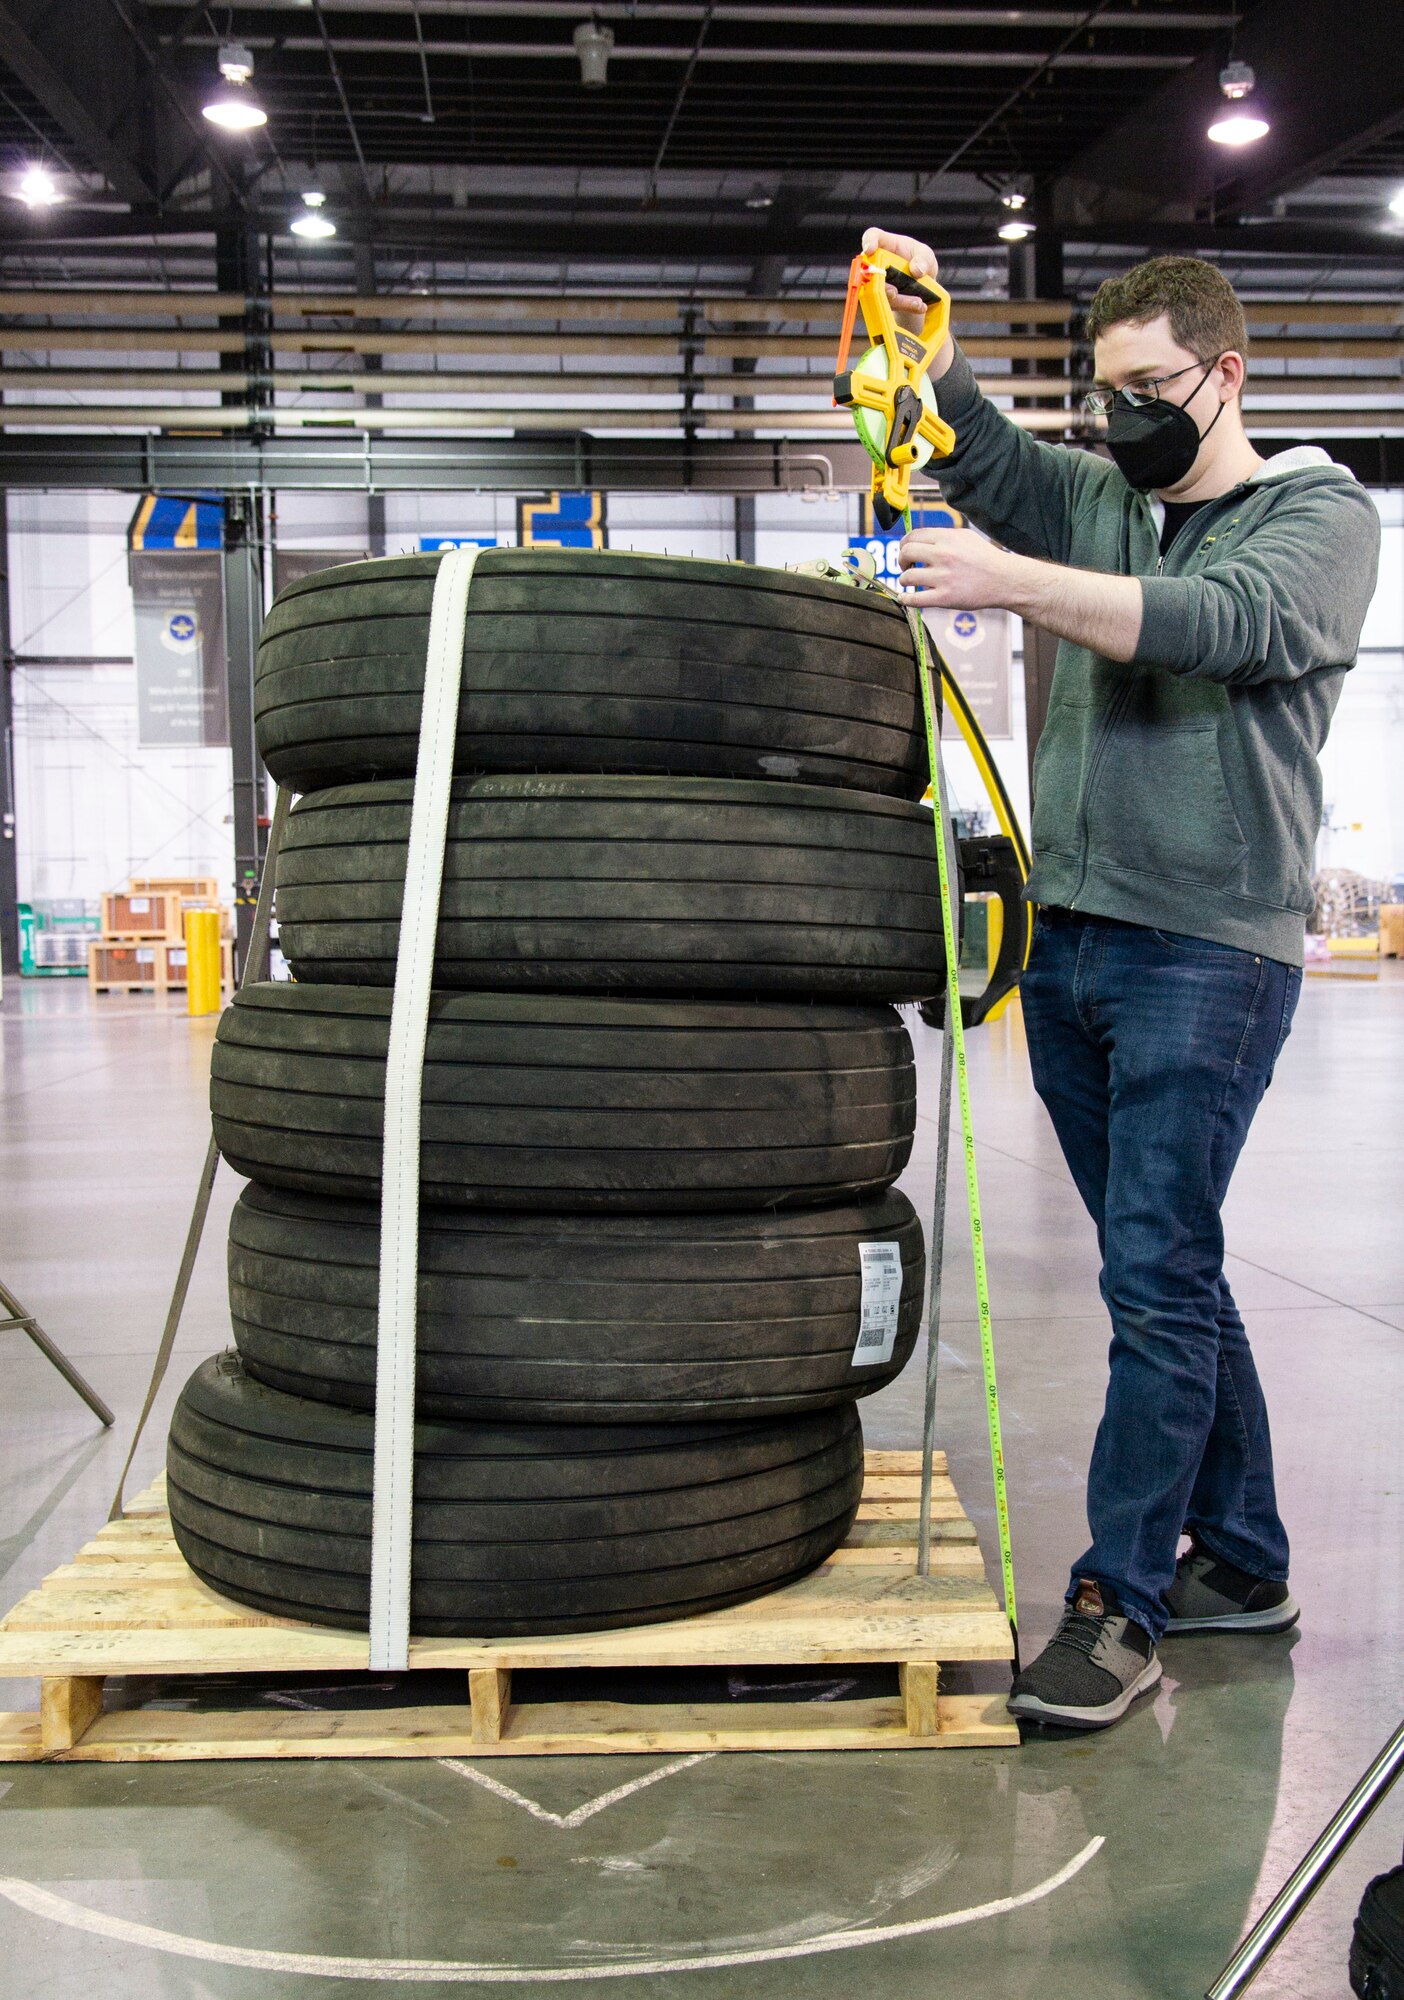 Vassili Koriabine, Cougaar Software Inc. software engineer, measures the total height of five tires on a pallet during Configured Air Load Building Tool testing on Dover Air Force Base, Delaware, Nov. 17, 2021. In an effort to modernize the 2T2 career field as part of the Aerial Port of the Future initiative, the 436th Aerial Port Squadron was selected for CALBT testing due to its location and daily cargo movement. (U.S. Air Force photo by Roland Balik)